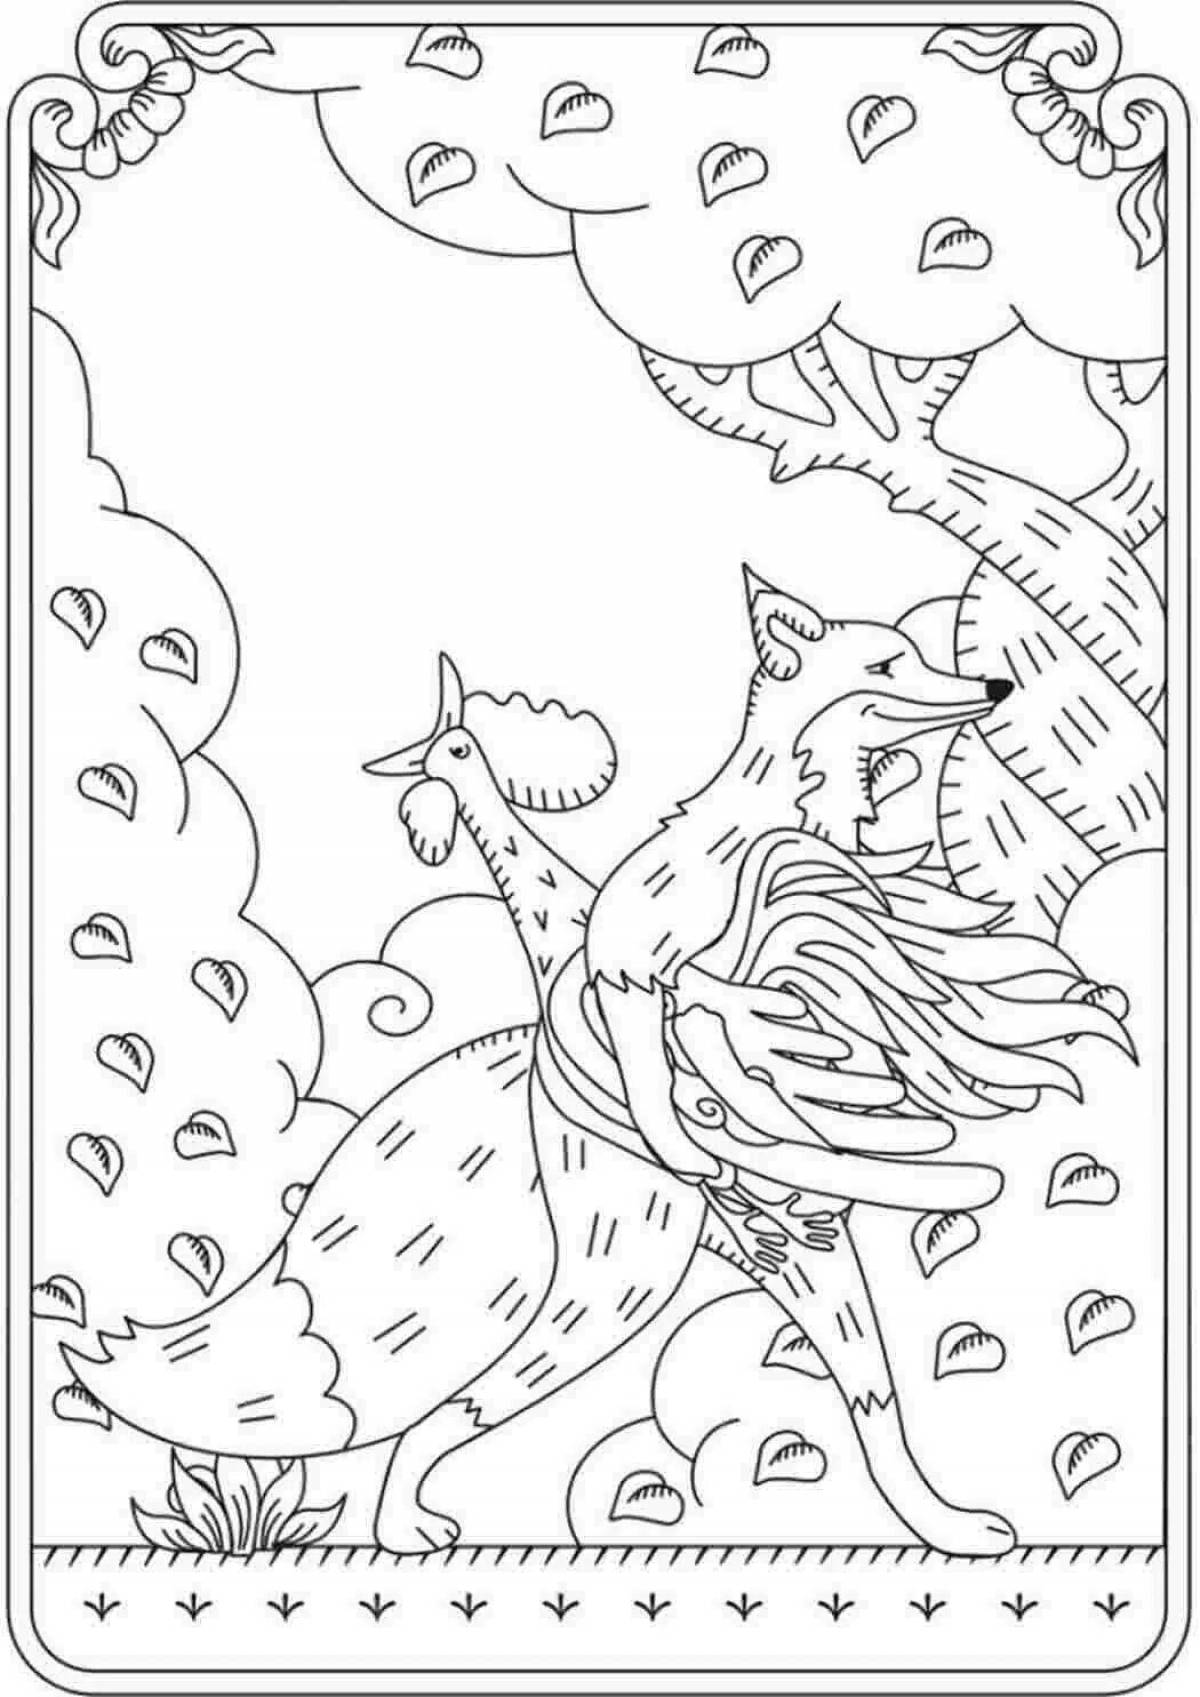 Radiant coloring fox and rooster Russian folk tale